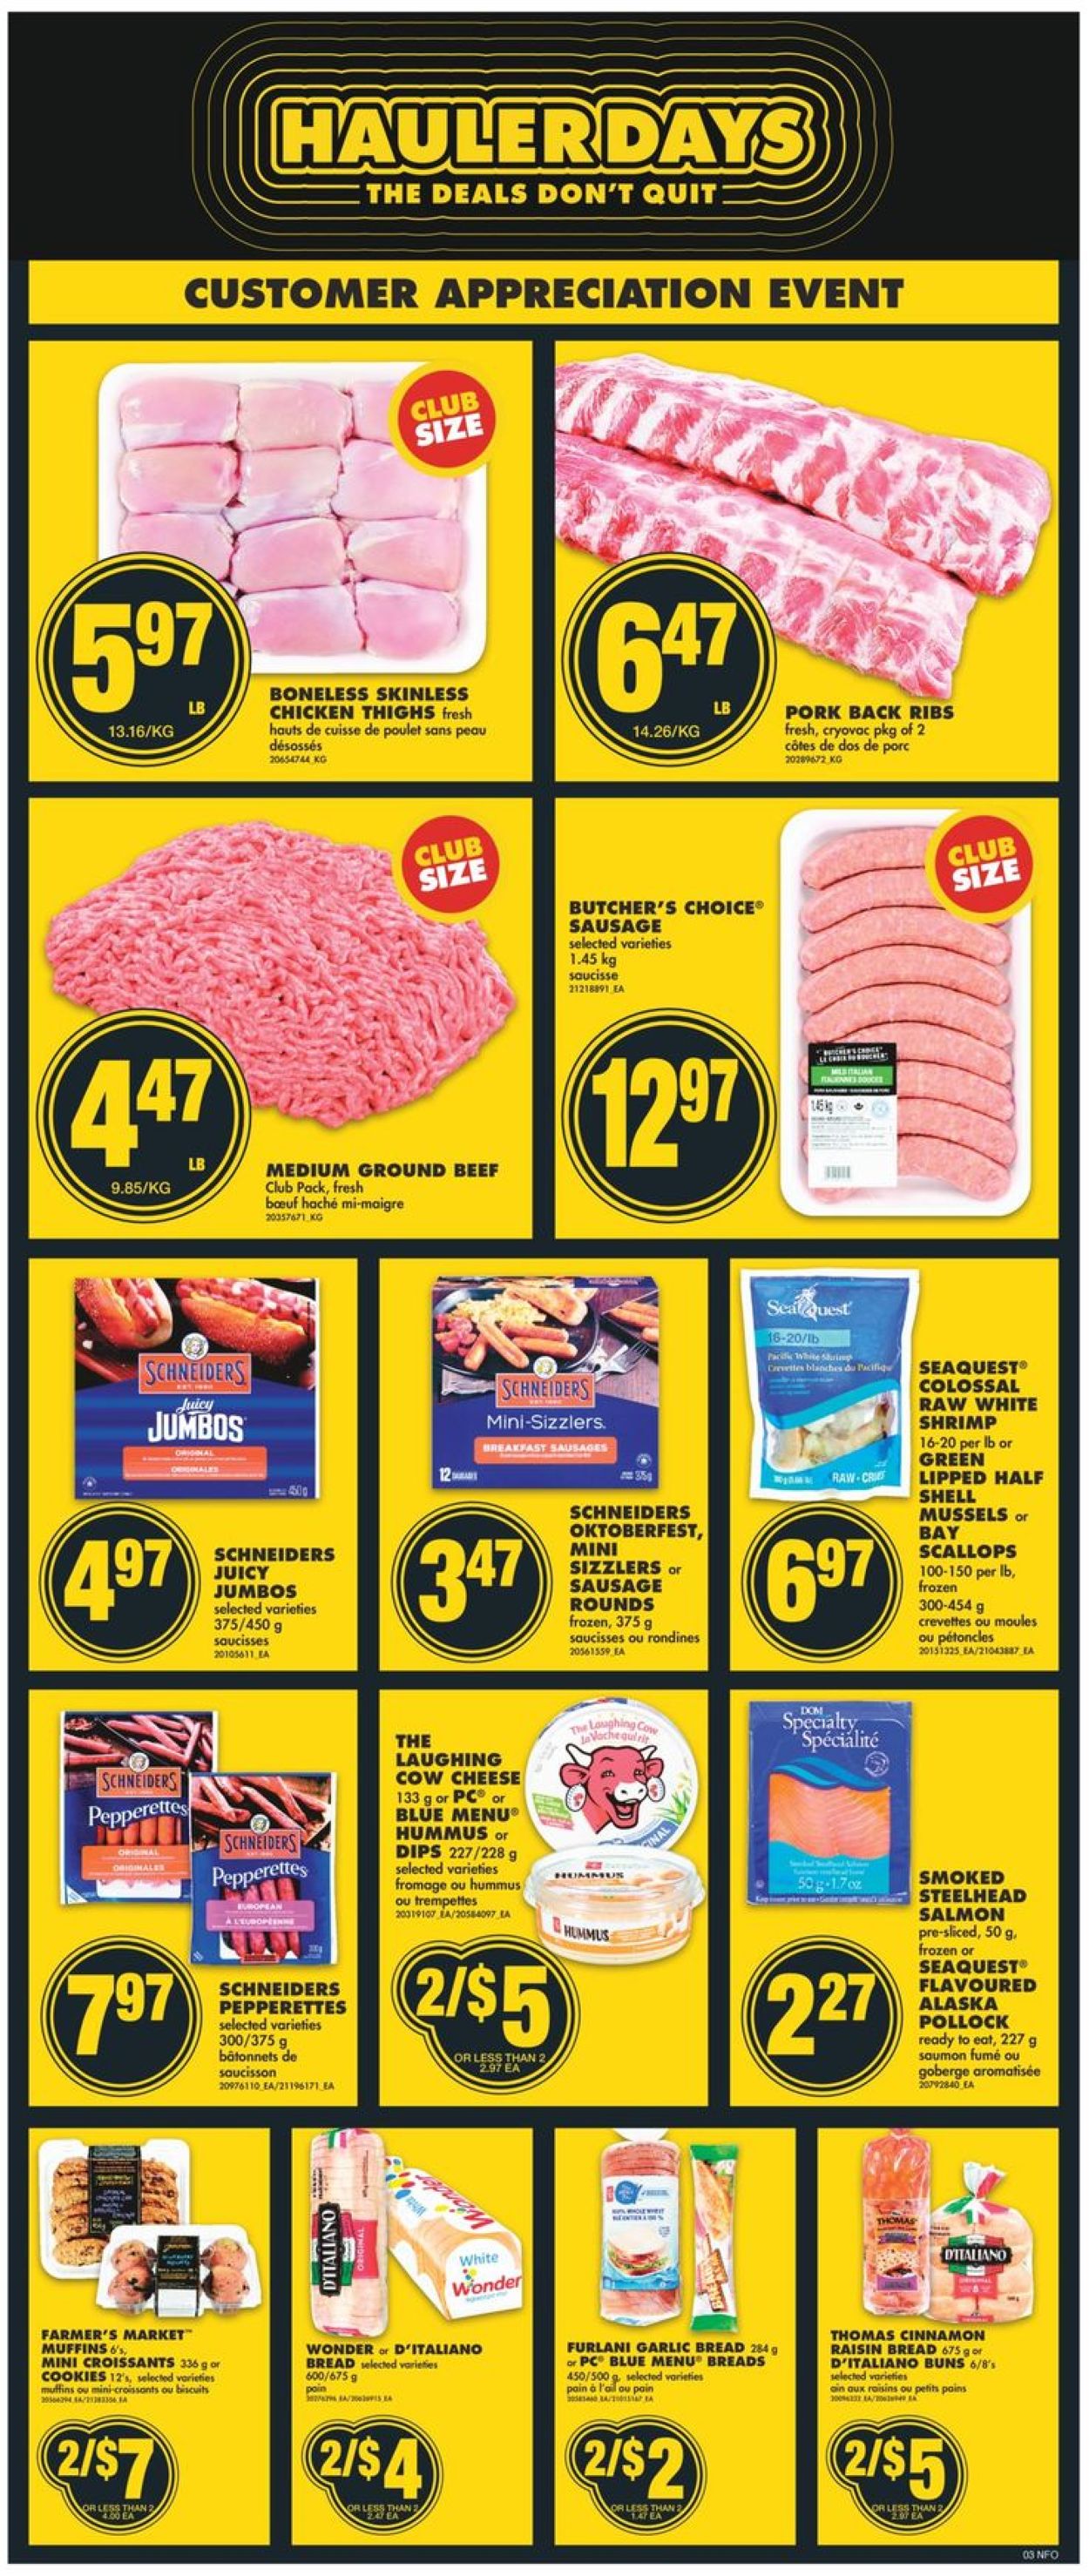 No Frills Flyer from 10/21/2021